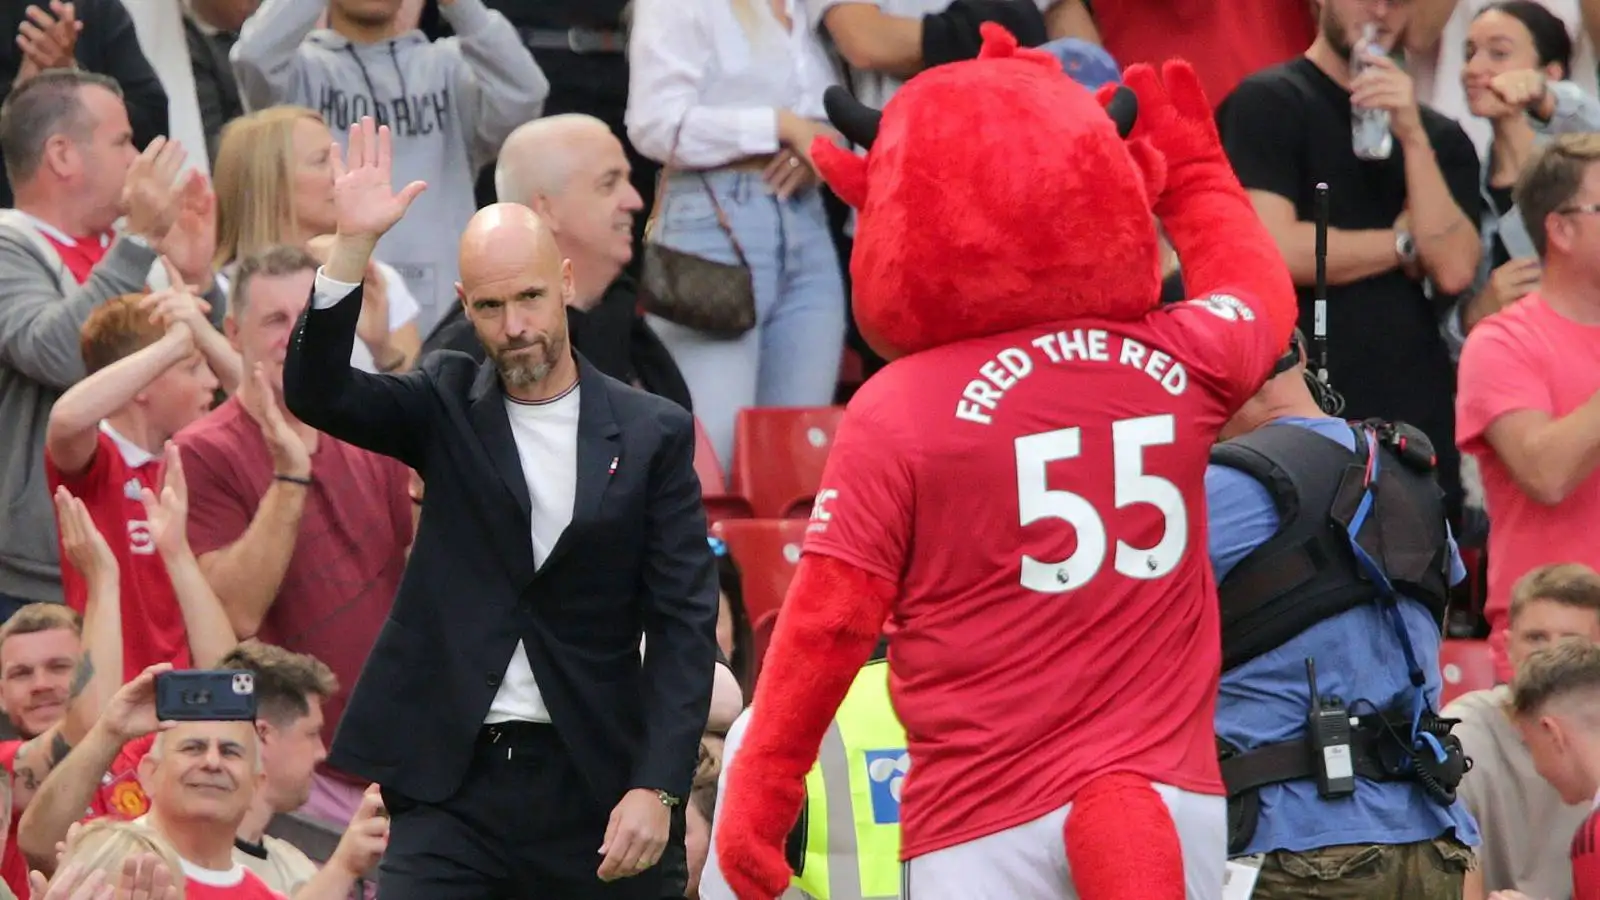 New Manchester United manager Erik ten Hag waves to fans ahead of the opening Premier League game against Brighton at Old Trafford